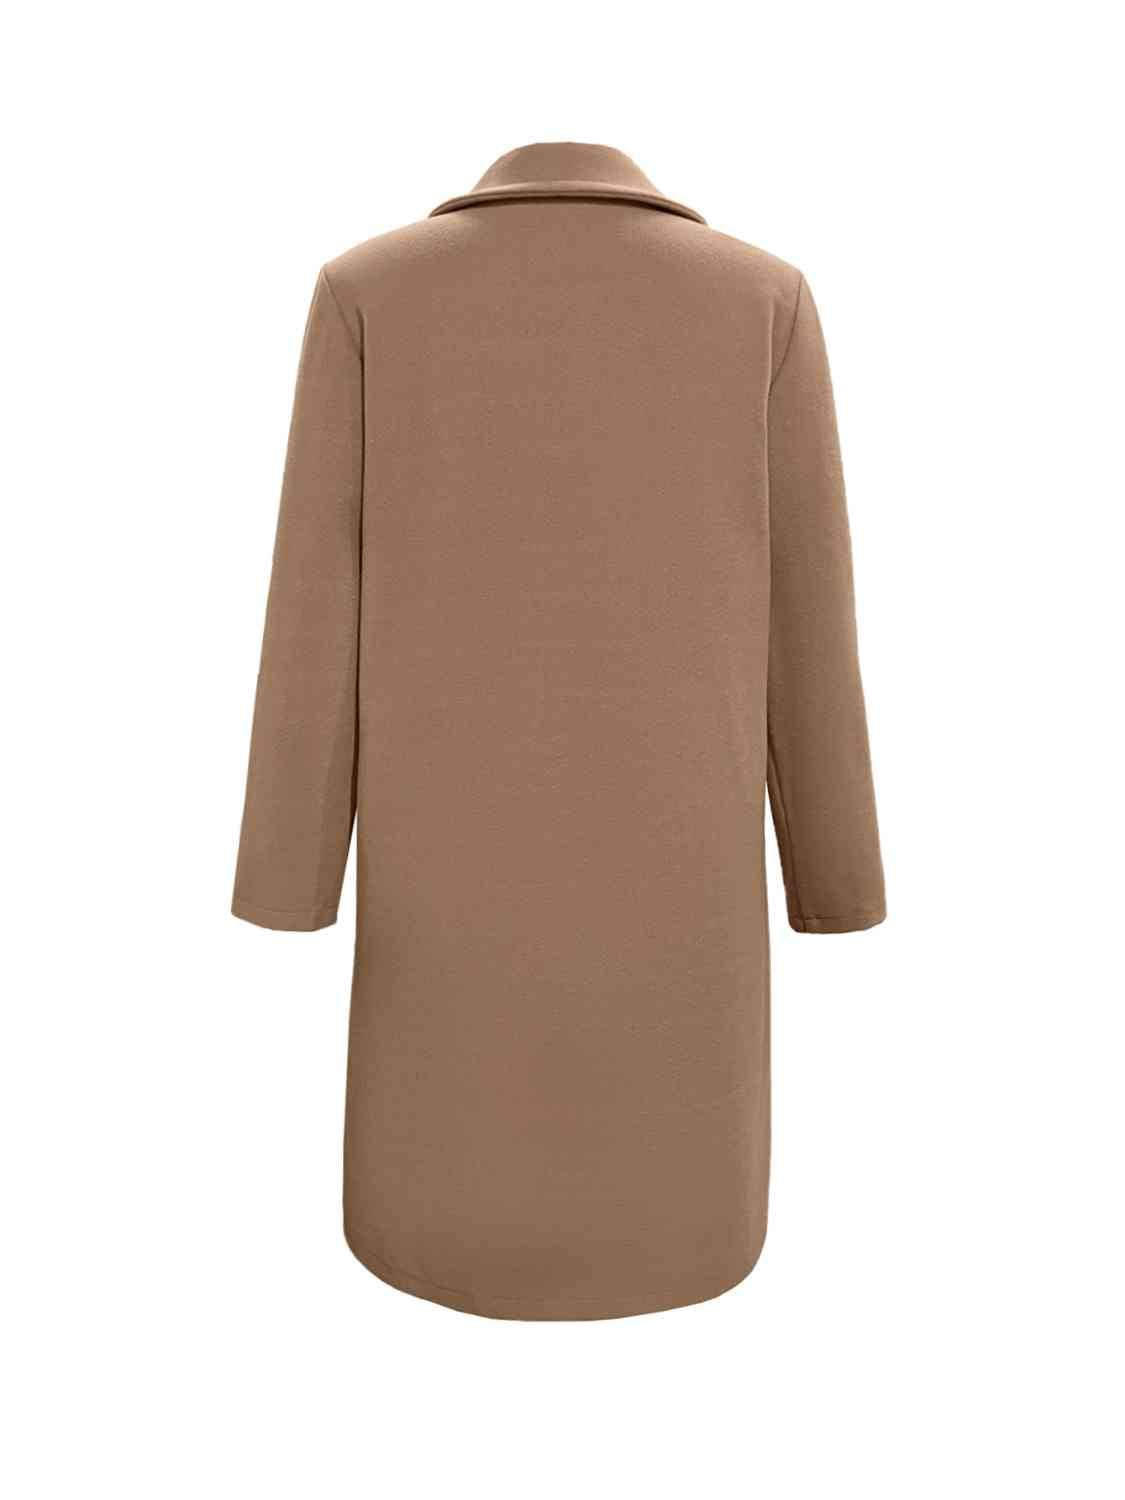 CLASSIC BUTTON FRONT KNEE LENGTH COAT in Camel